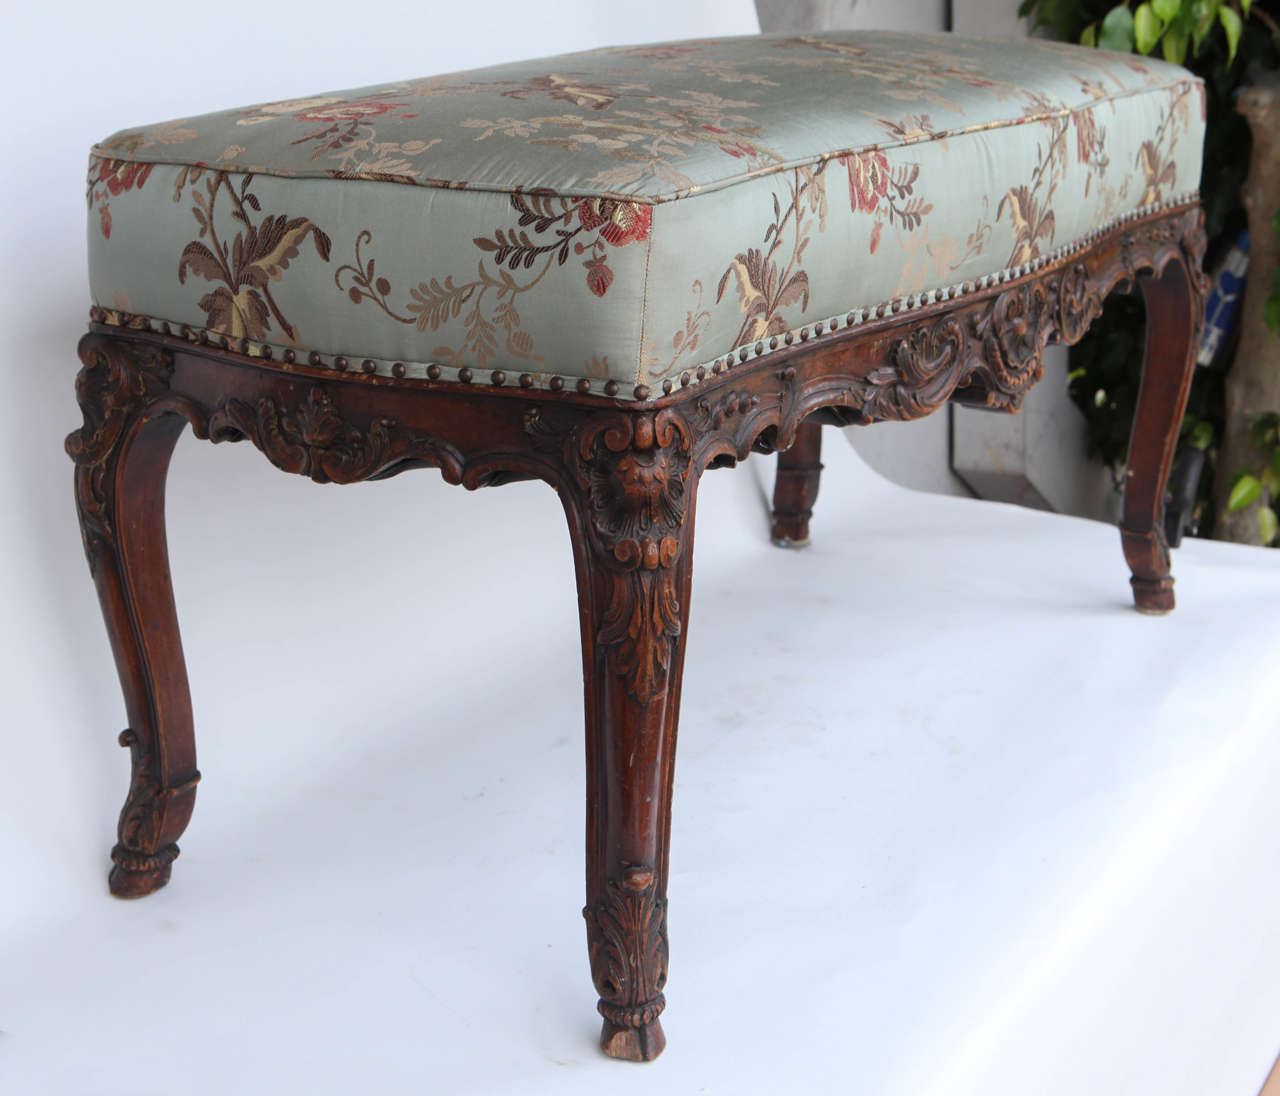 19th c. French carved Walnut Bench with Hoof Feet and finely carved Shell motif.  The silk fabric is from Decor de Paris.